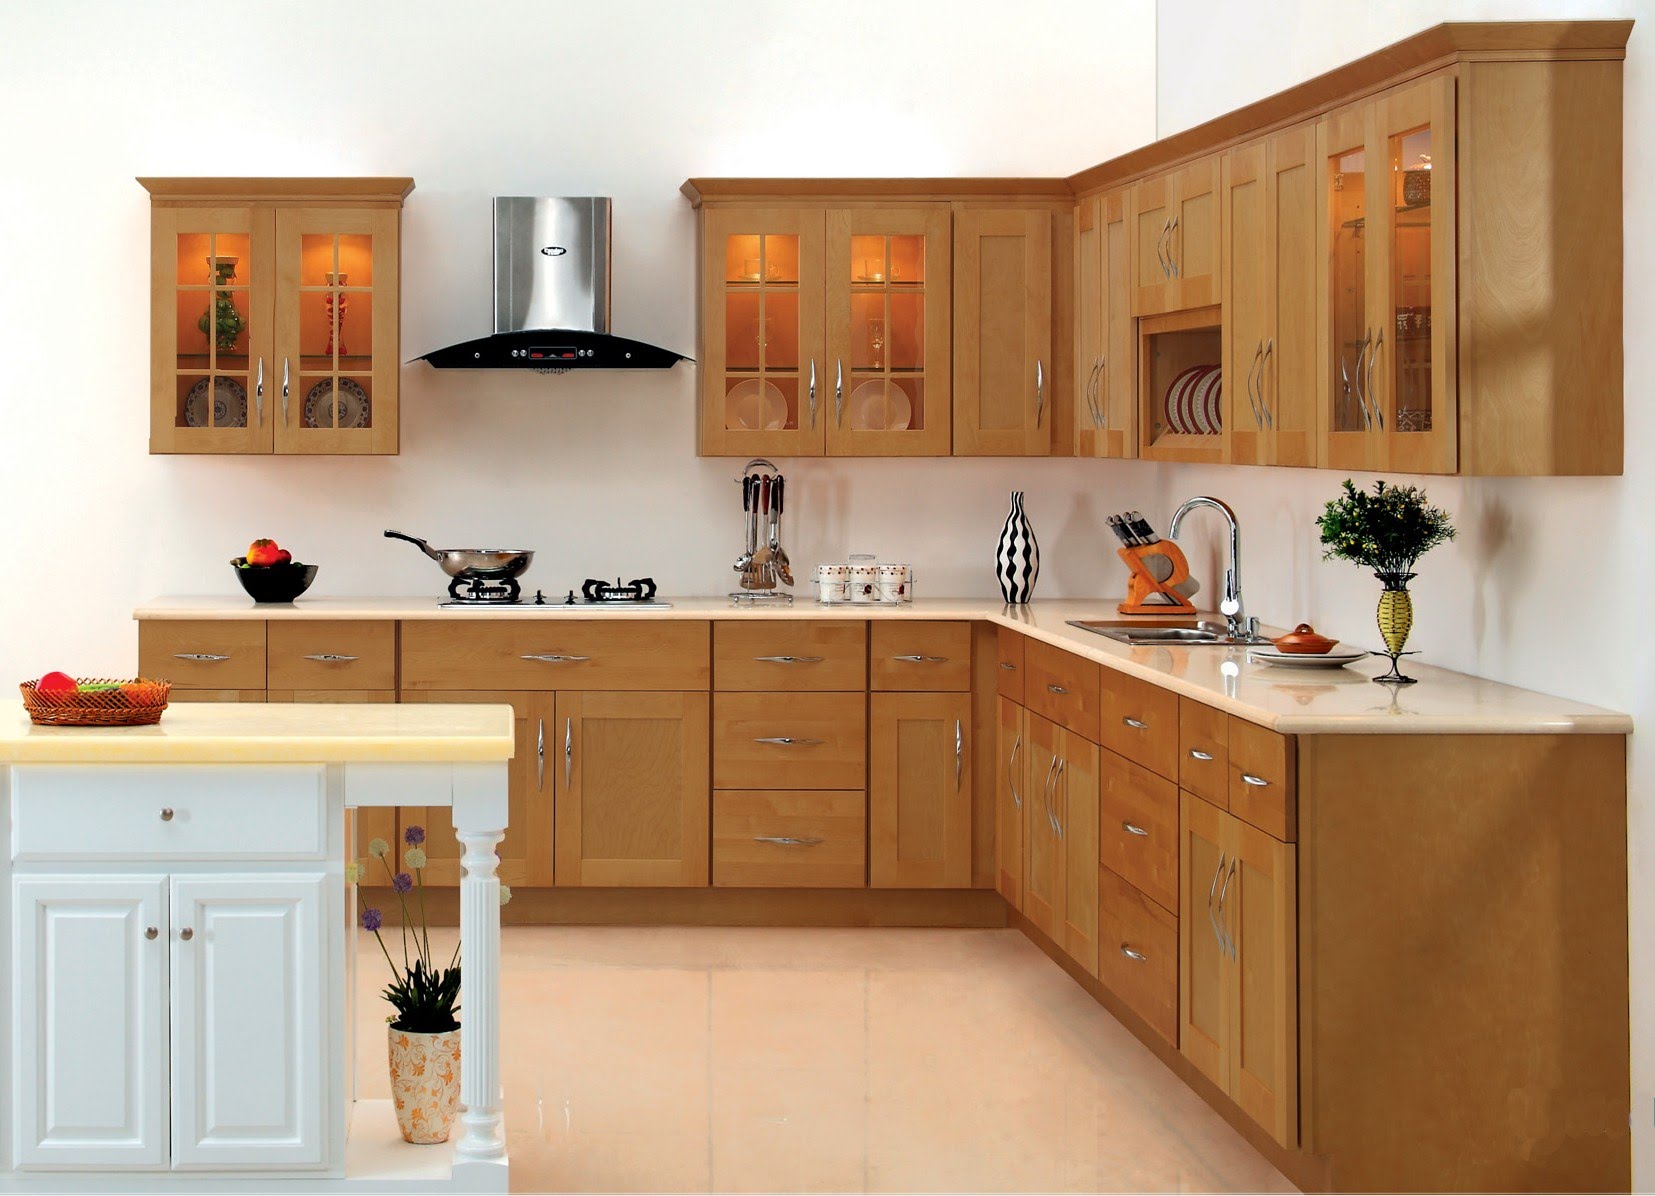 Settling on the Look of Your Kitchen Cabinets